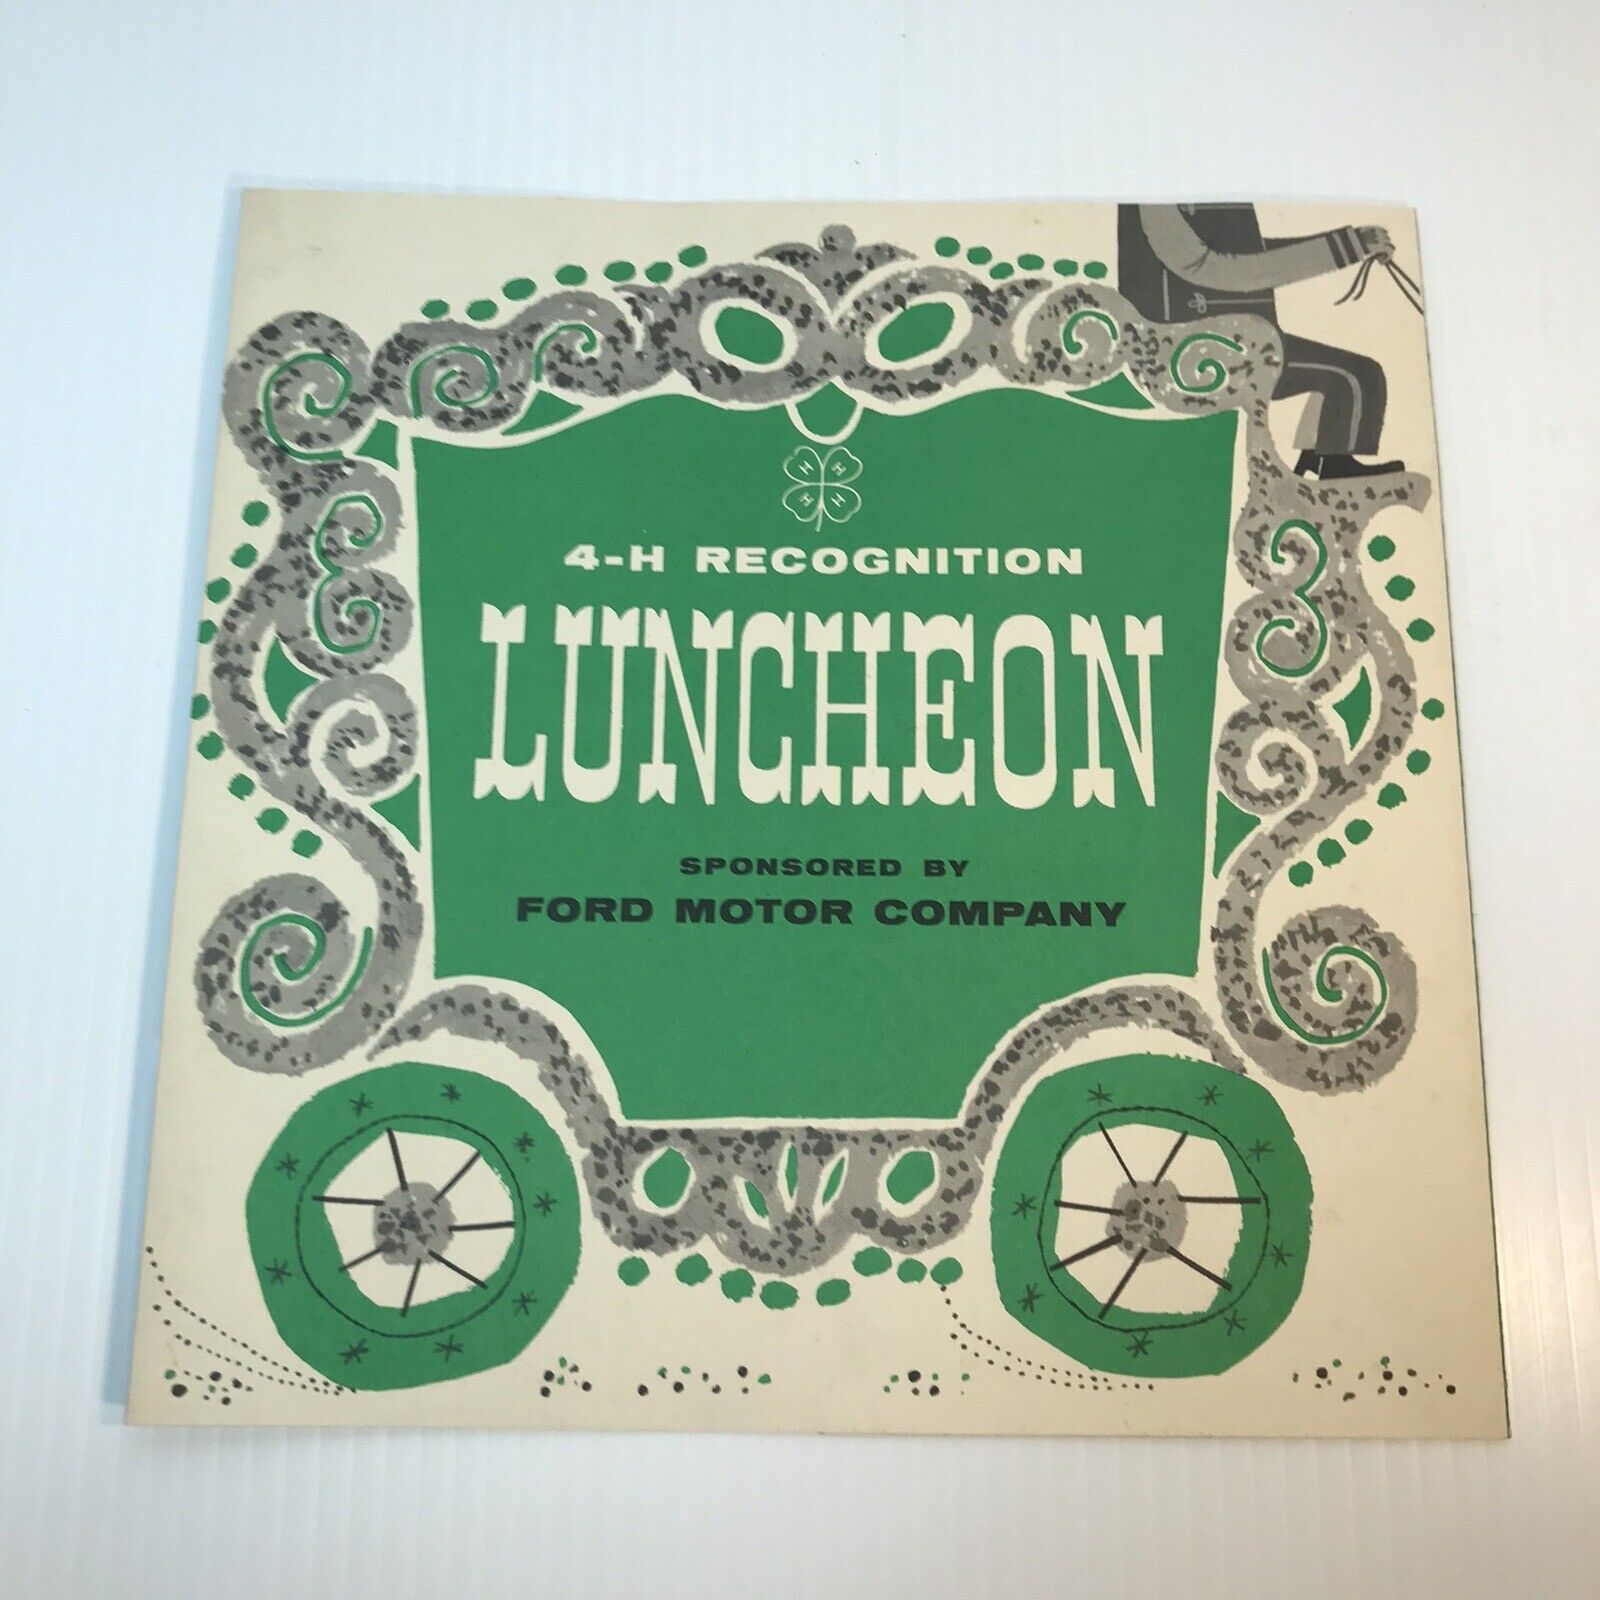 1957 4-H Recognition Luncheon Program Sponsored by Ford Motor Chicago Congress